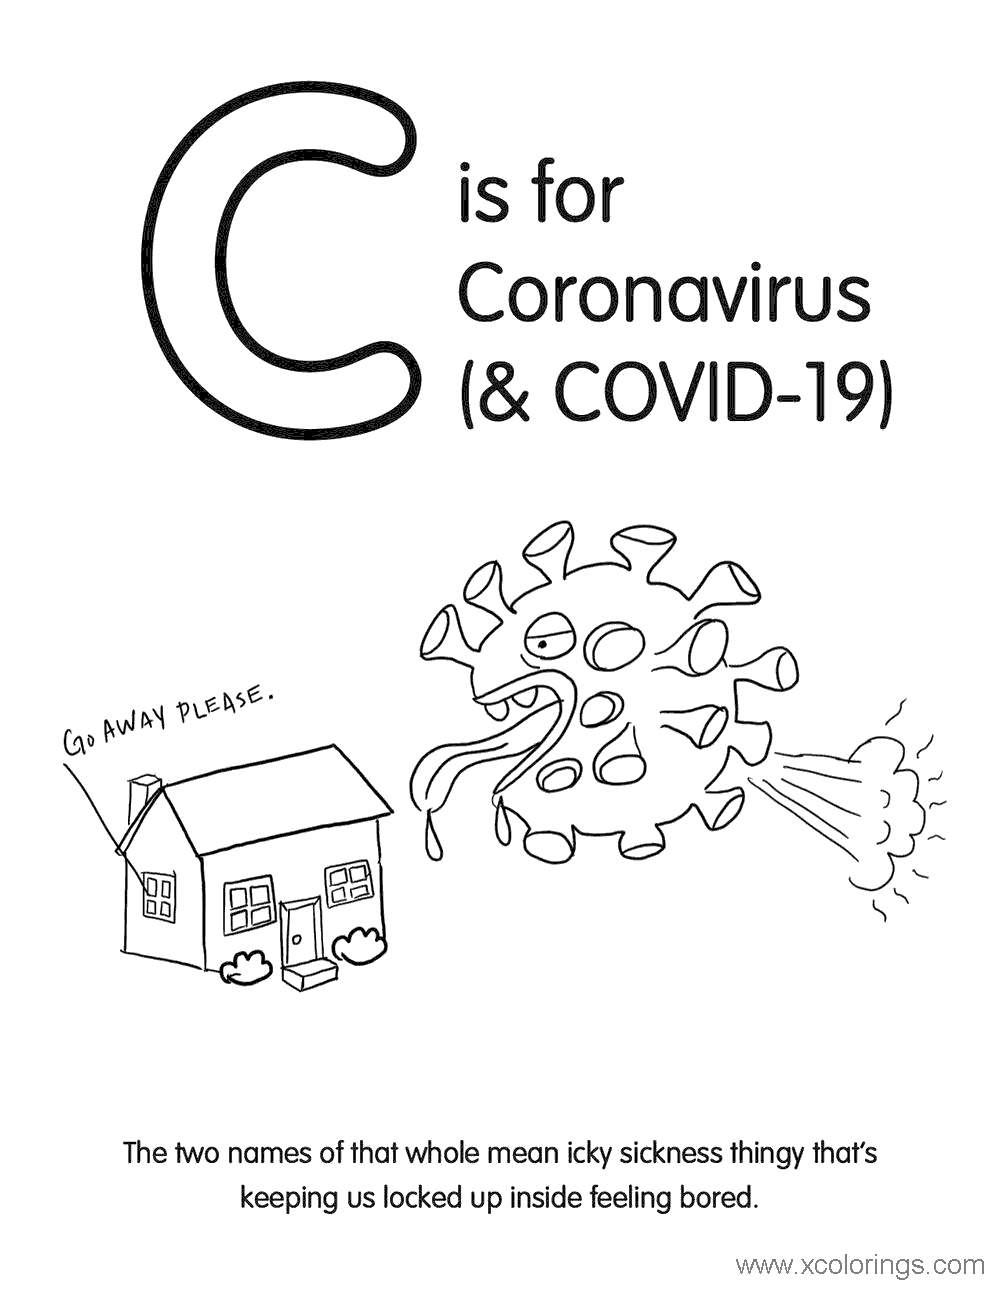 Free C is for Coronavirus Covid-19 Coloring Pages printable